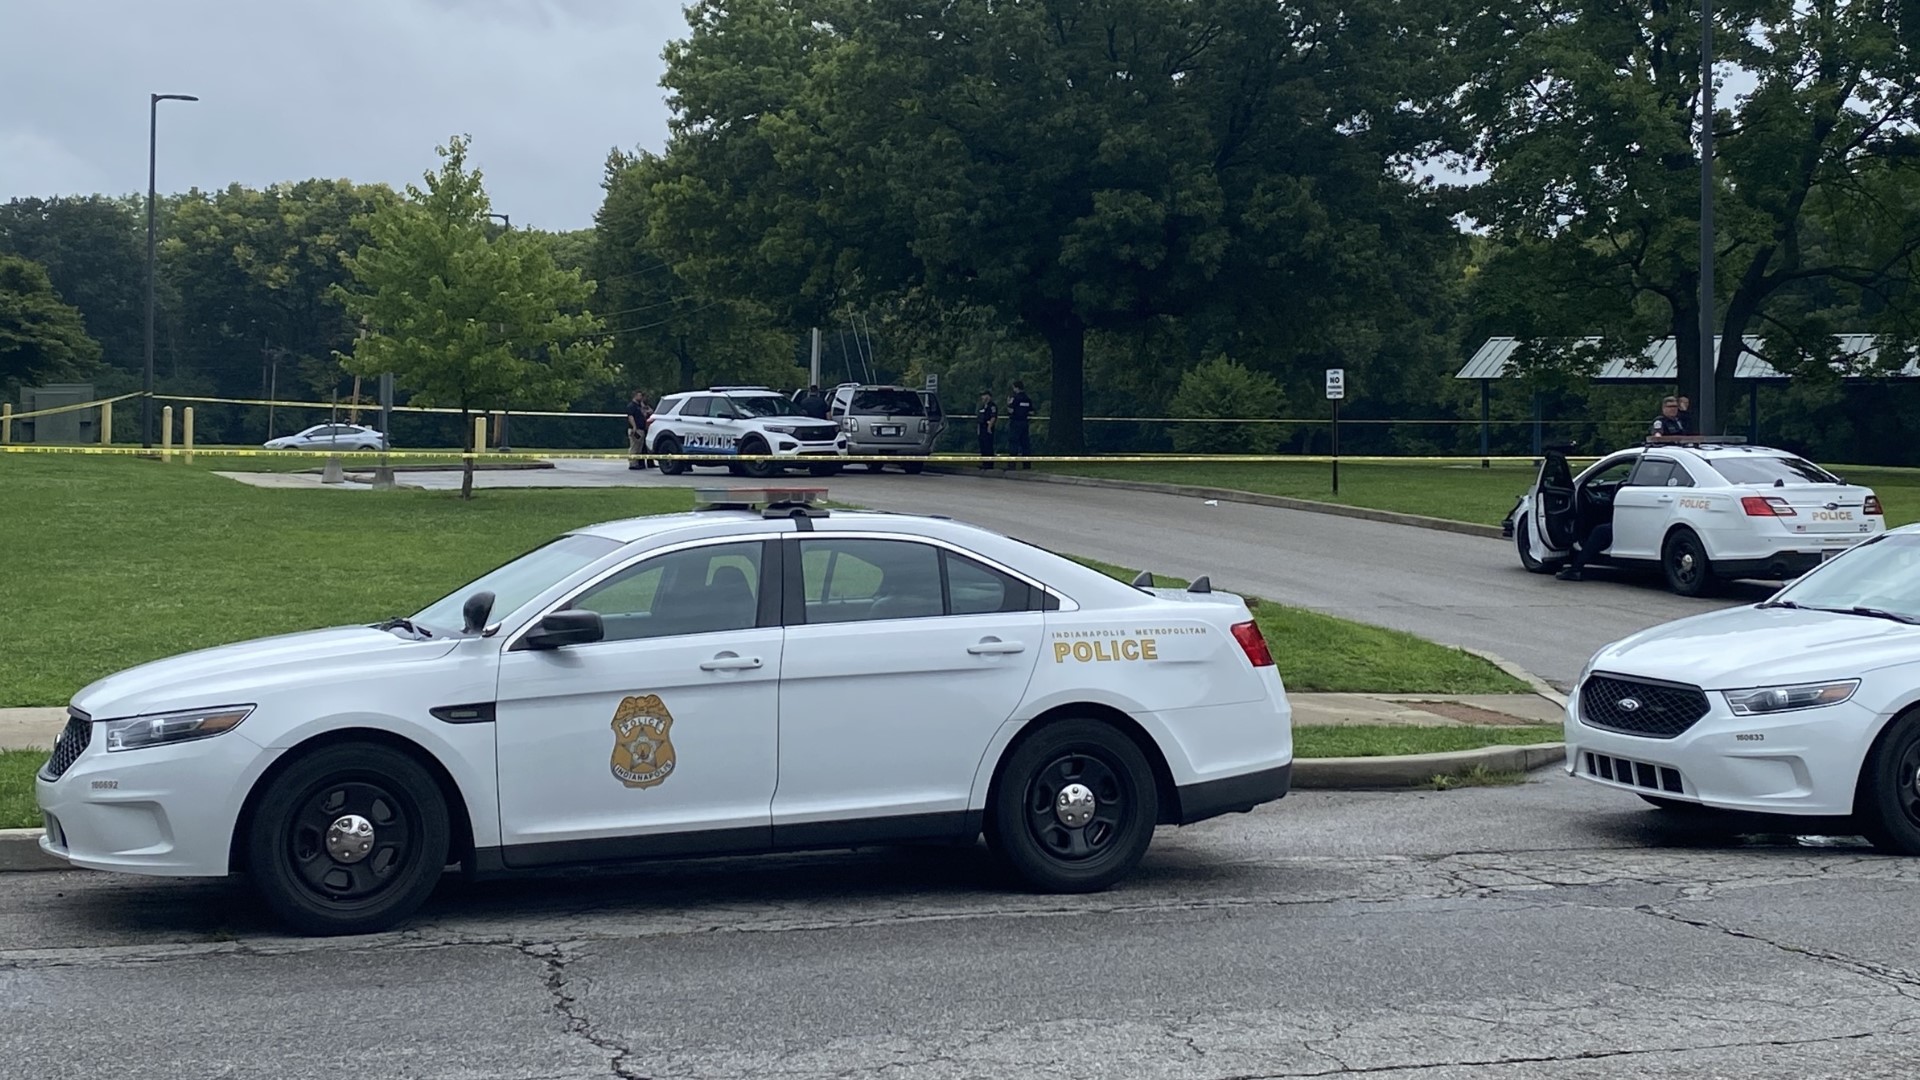 Police found three men dead at the 6100 block of Gateway Drive, near 38th Street and North High School Road, around 8:15 a.m. on Aug. 14.